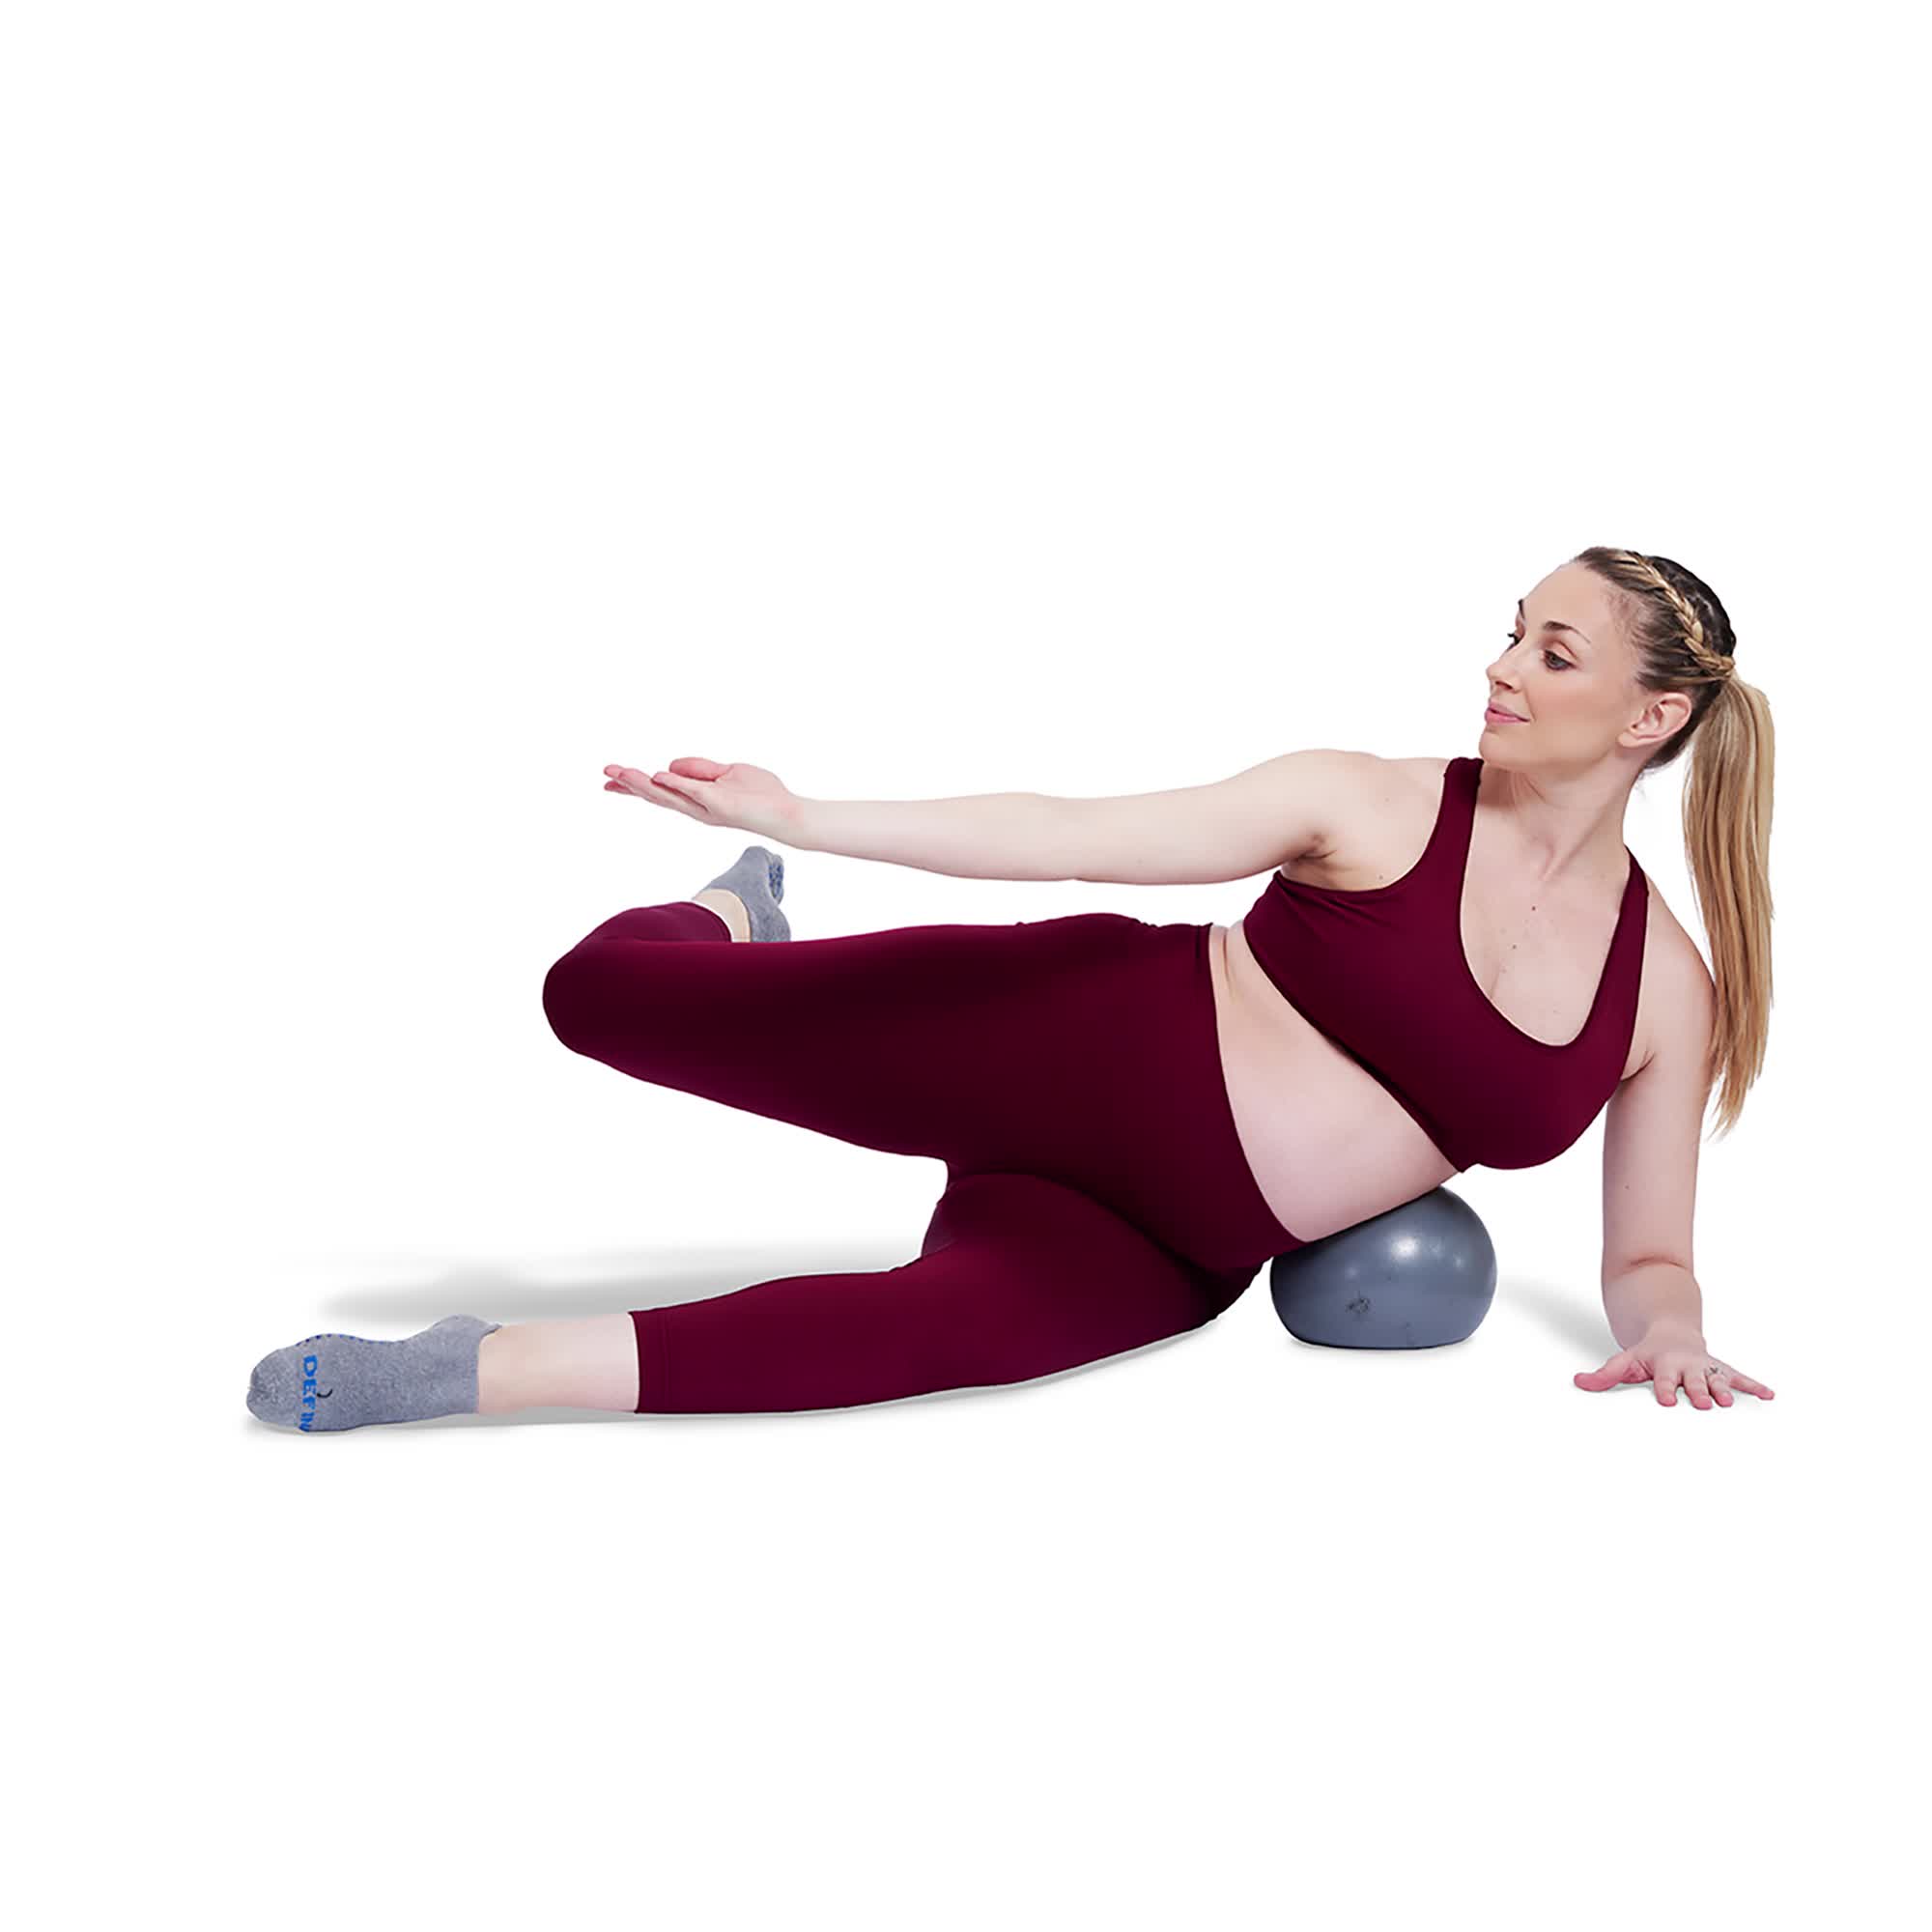 7 Pregnancy Pilates Leg Exercises - Knocked-Up Fitness® and Wellness